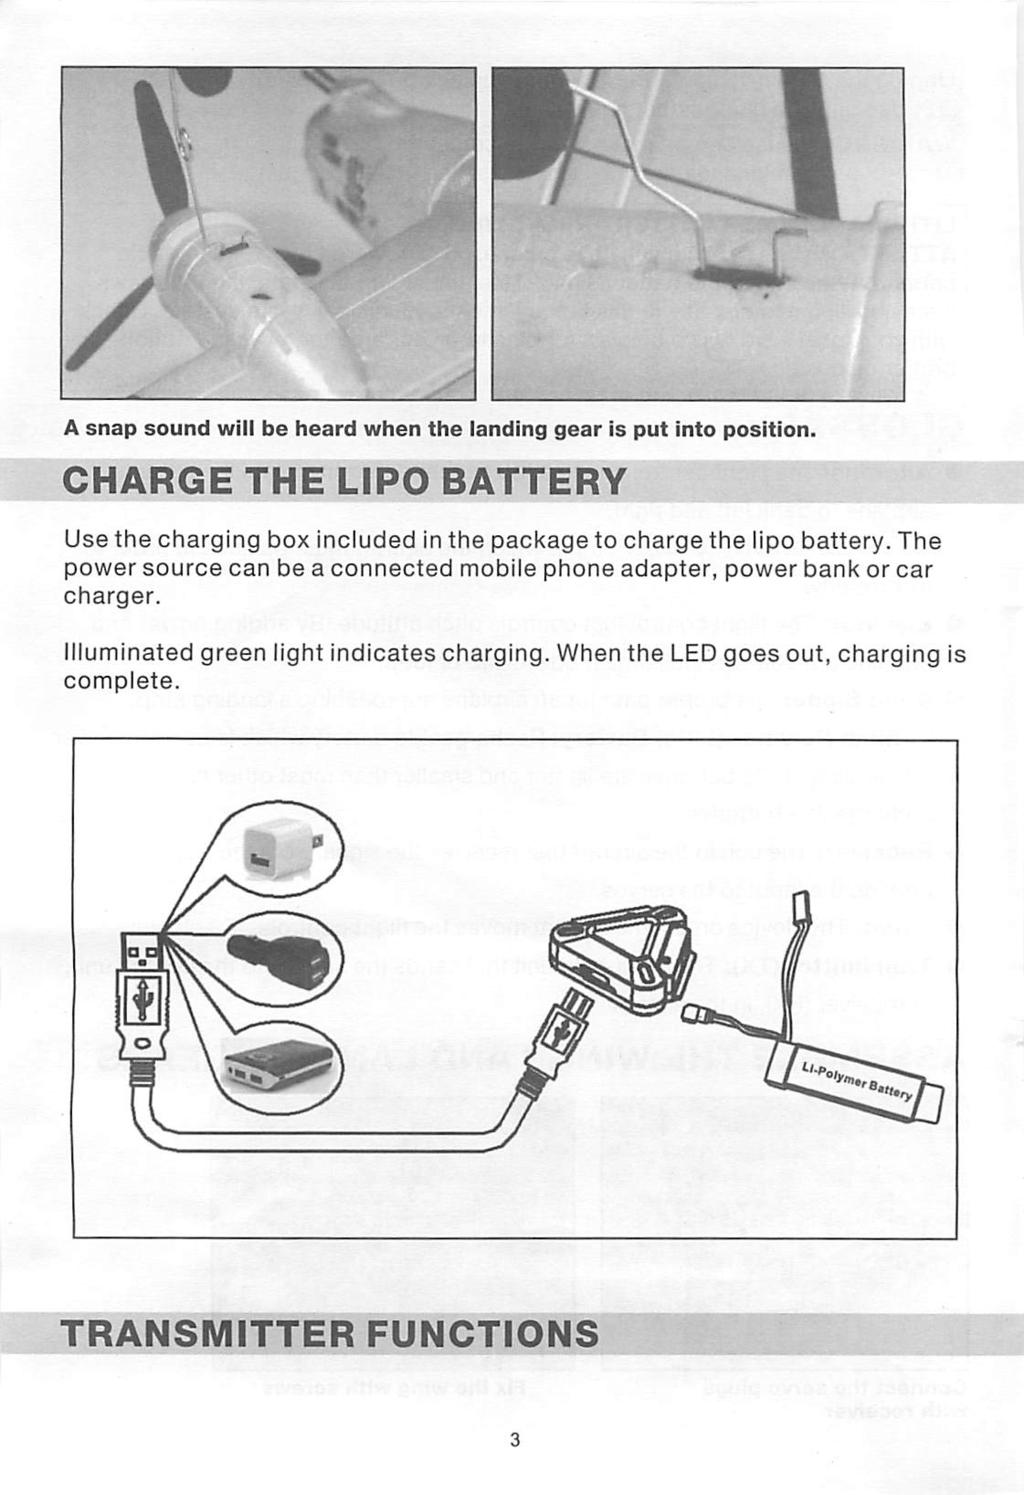 A snap sound will be heard when the landing gear is put into position. CHARGE THE LIPO BATTERY Use the charging box included in the package to charge the lipo battery.